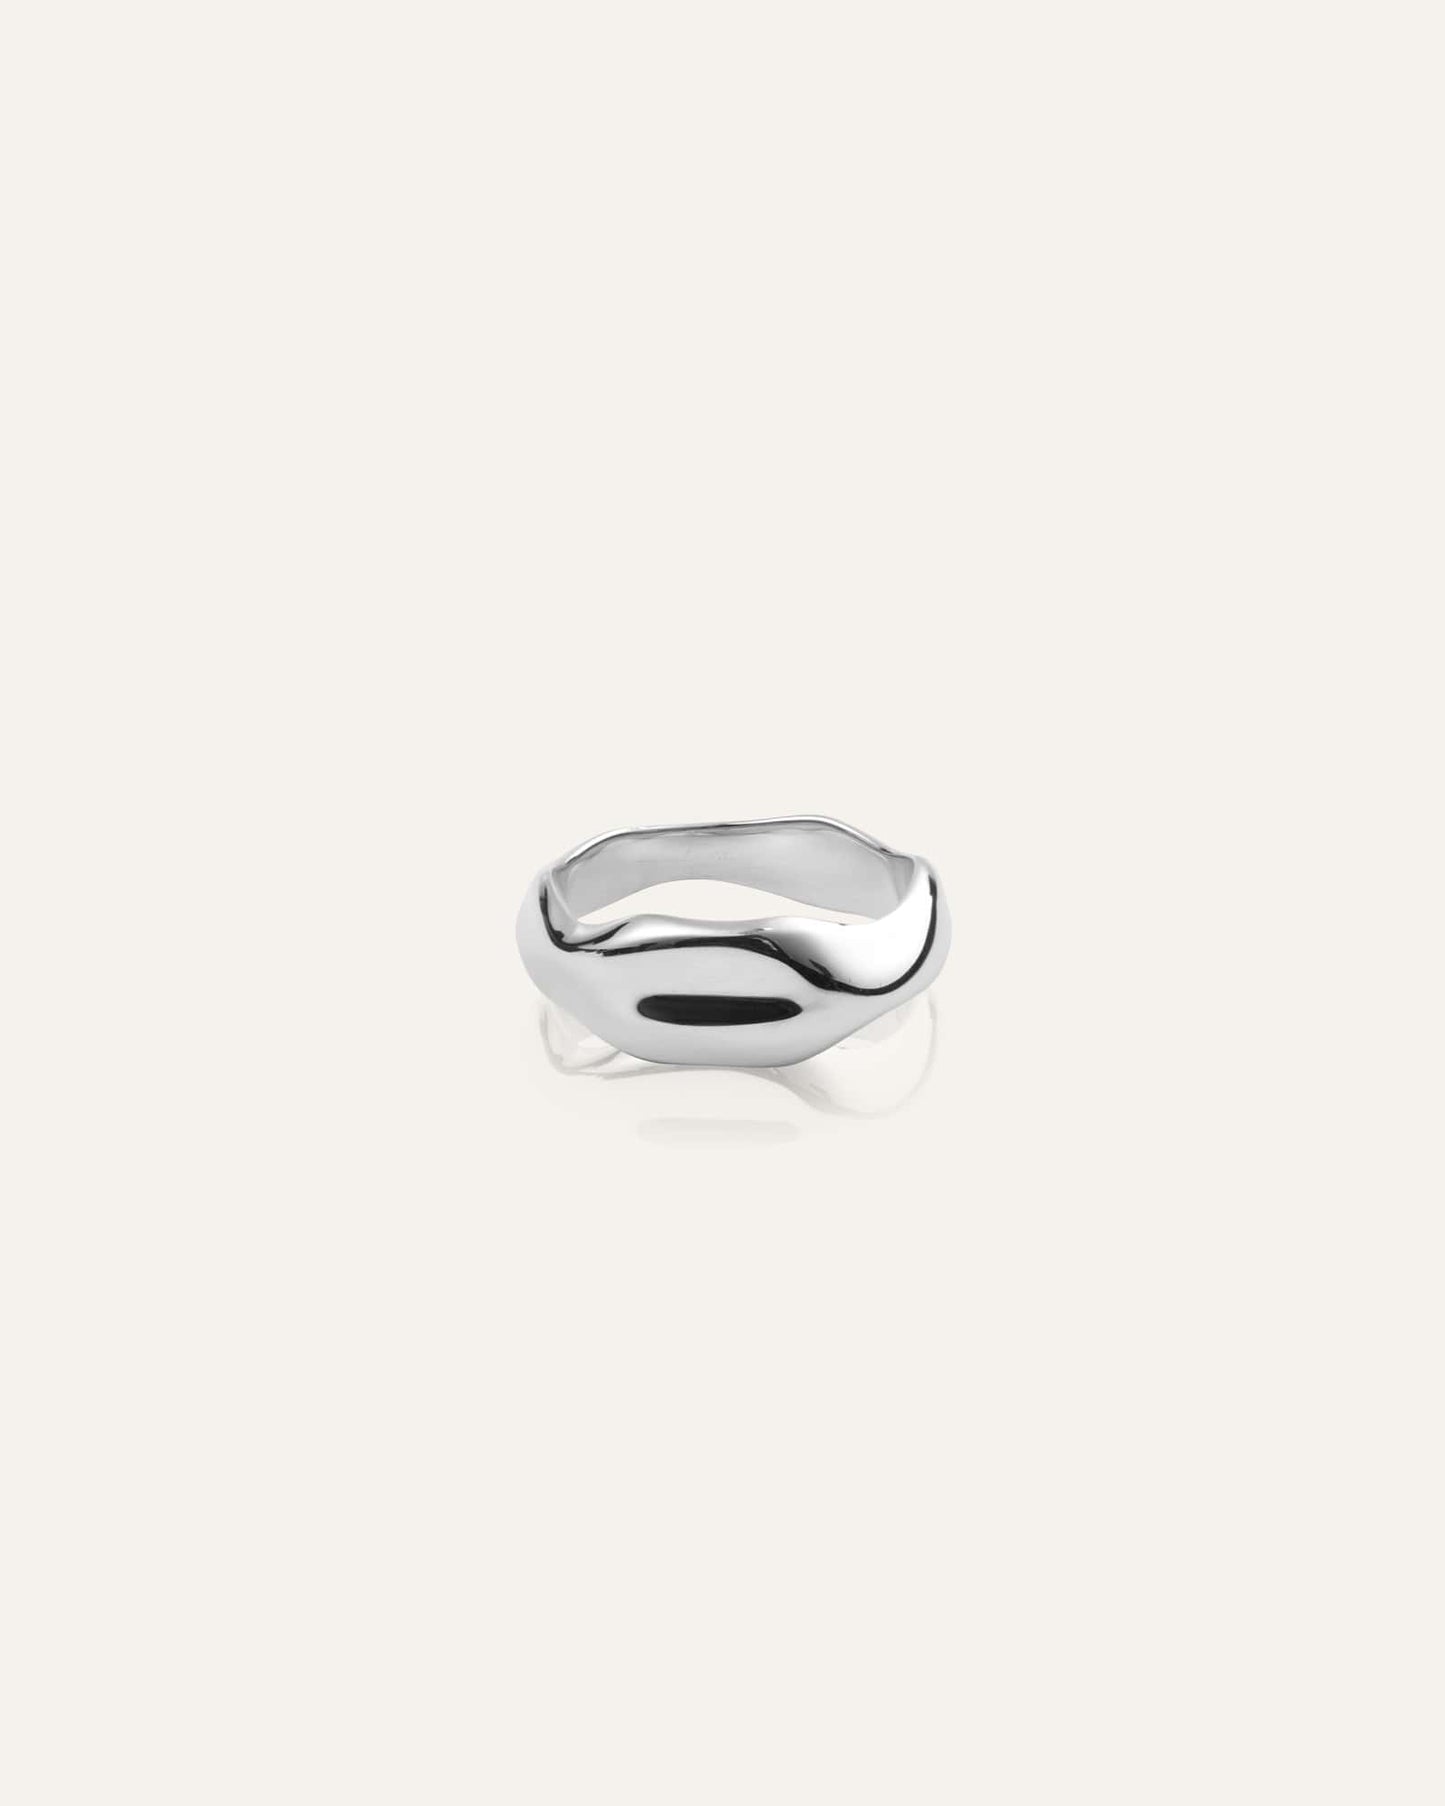 WAVY BOLDED SILVER RING